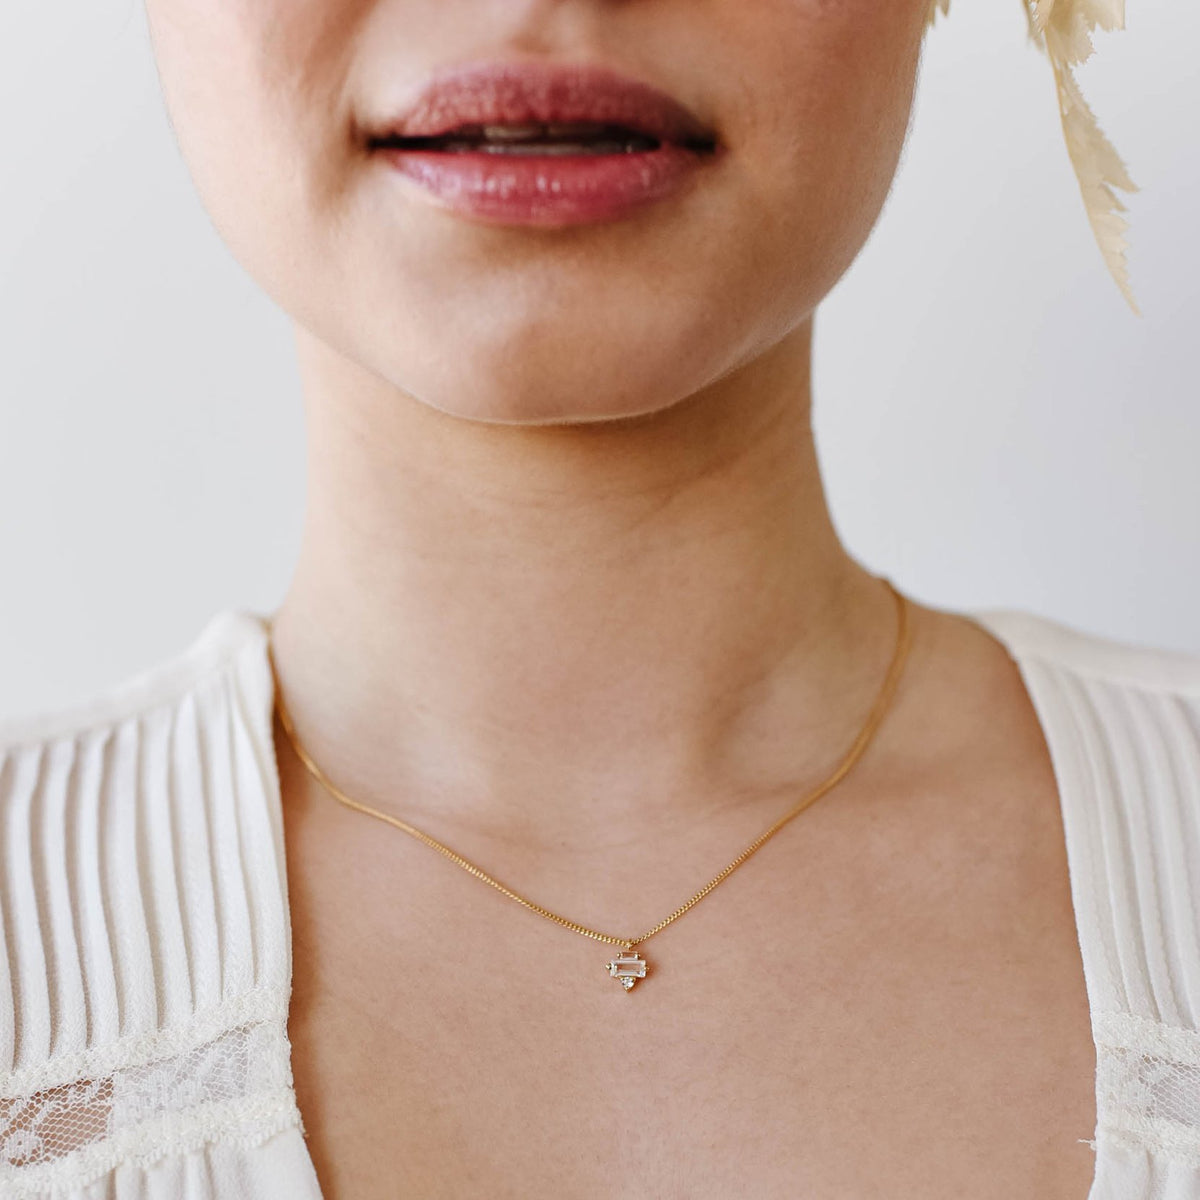 Tiny Loyal Prism Necklace - White Topaz, Cubic Zirconia &amp; Silver - SO PRETTY CARA COTTER